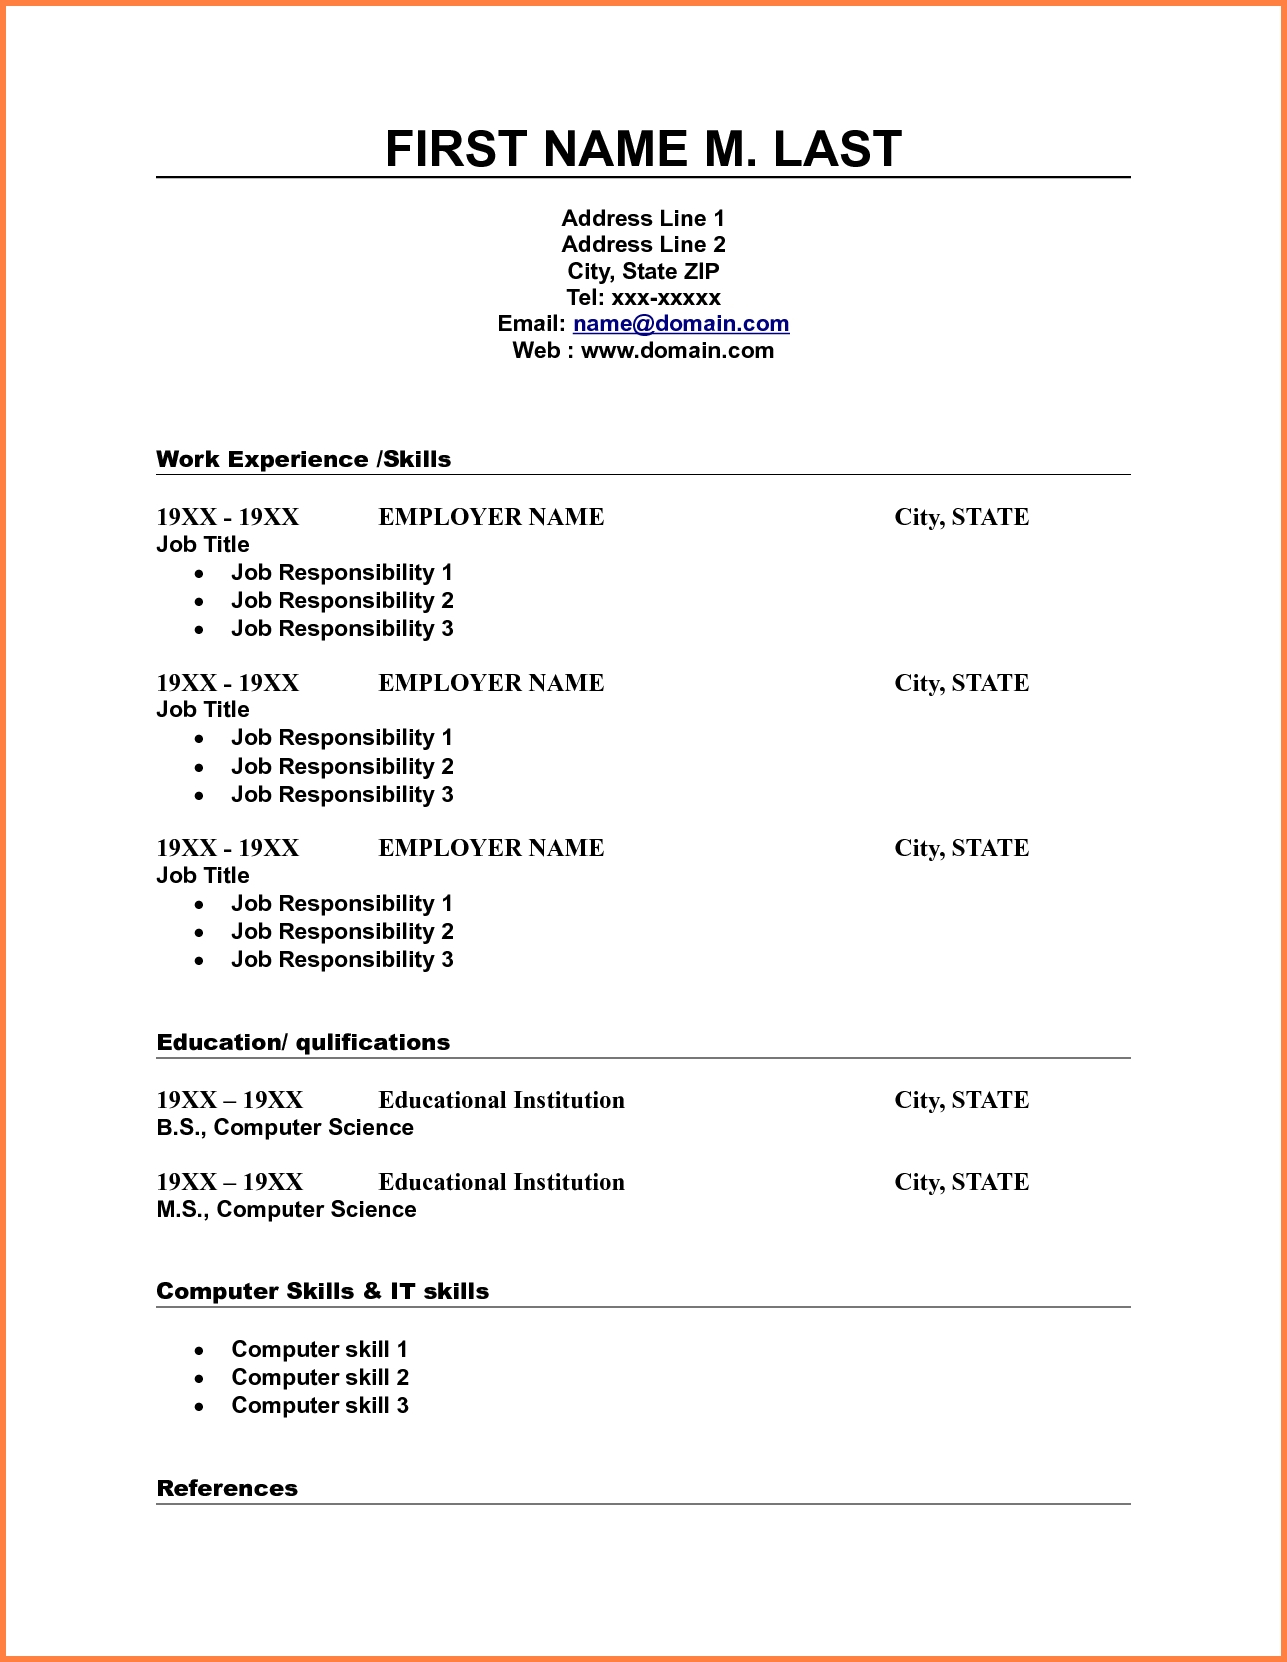 Free Printable Fill In The Blank Resume Templates Free Printable